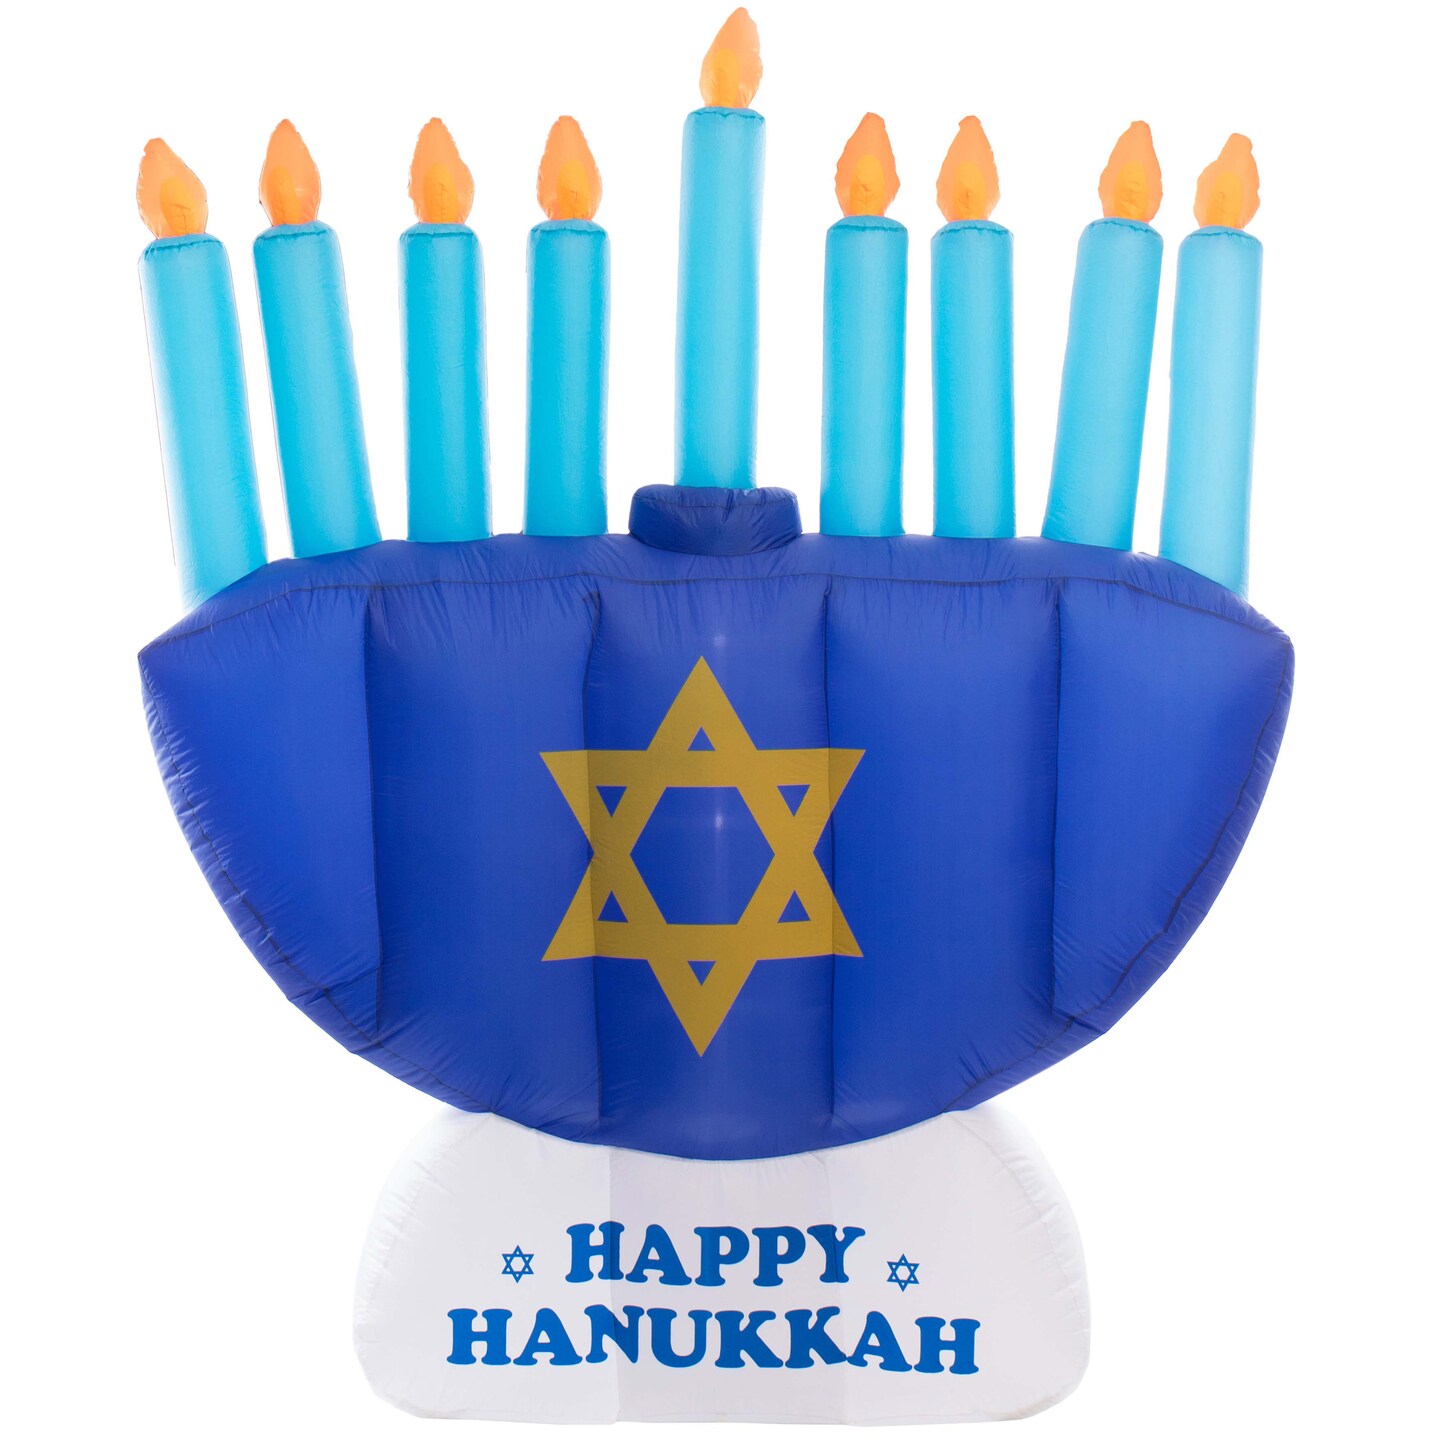 Gardenised Giant Hanukkah Inflatable Menorah - Yard Decor with Built-in Bulbs Tie-Down Points and Powerful Built in Fan